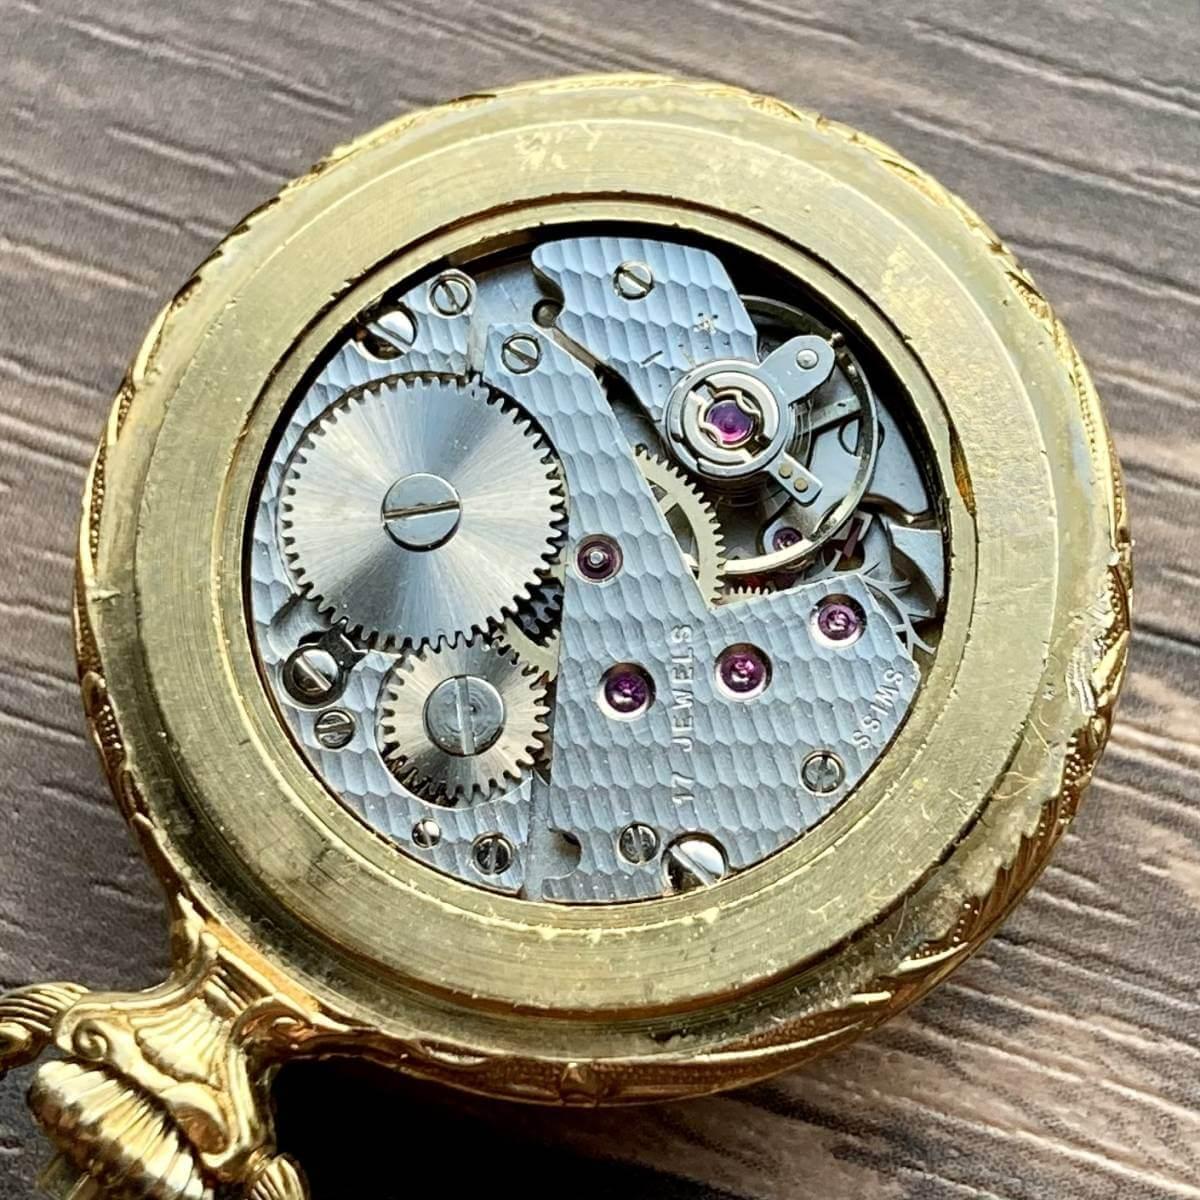 Edox Pocket Watch Antique Modified Gold Case 28mm Vintage - Murphy Johnson Watches Co.